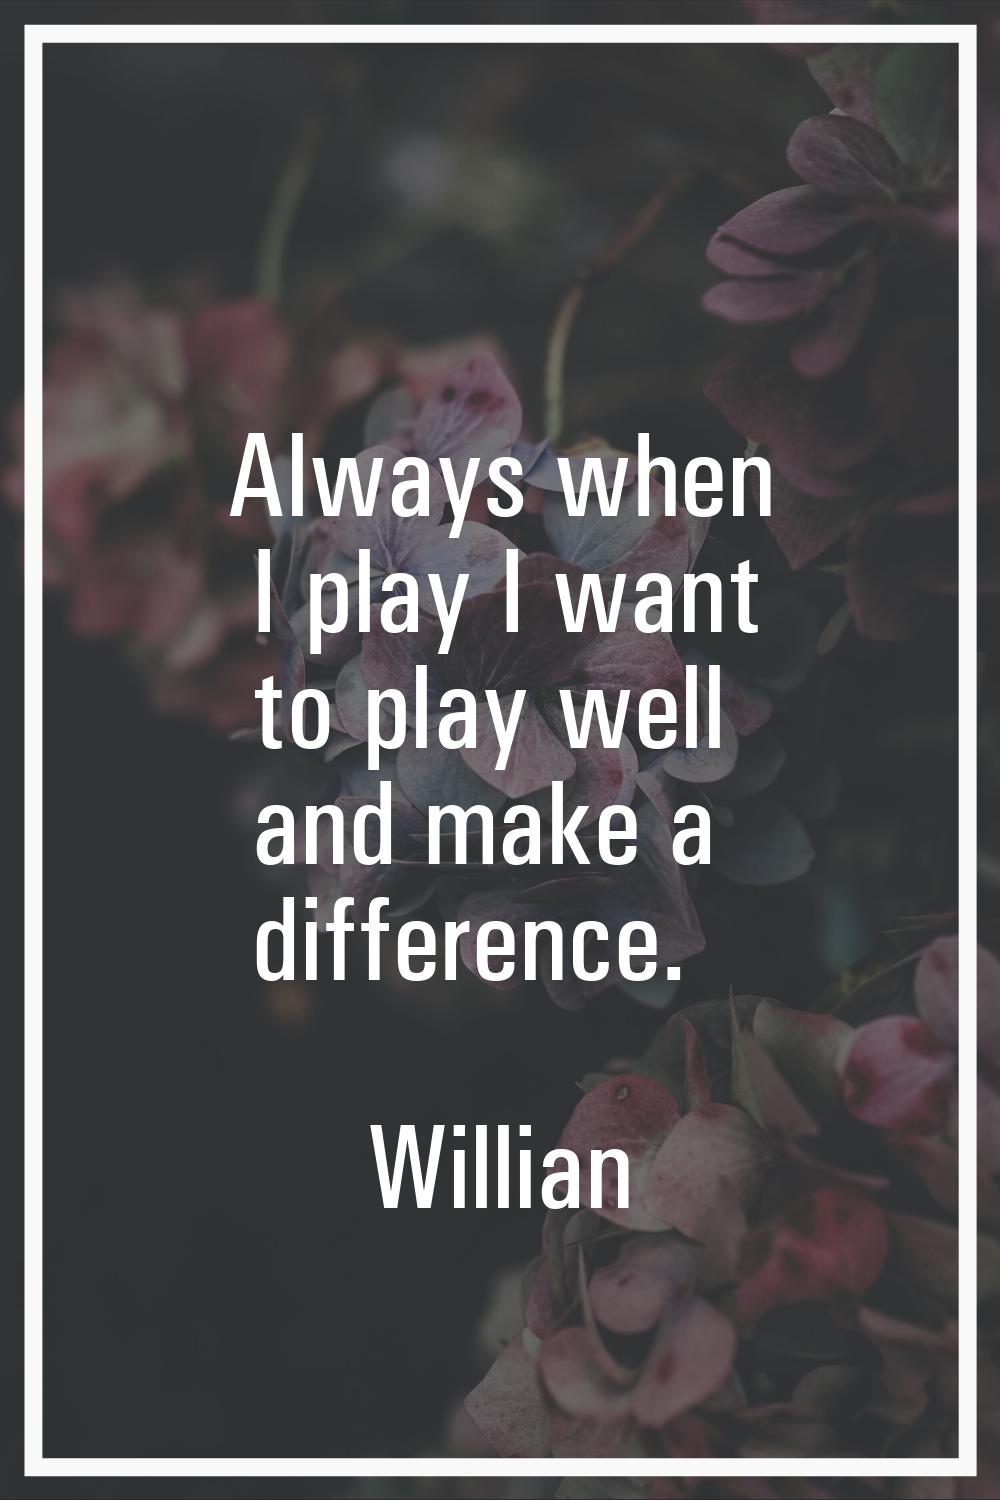 Always when I play I want to play well and make a difference.